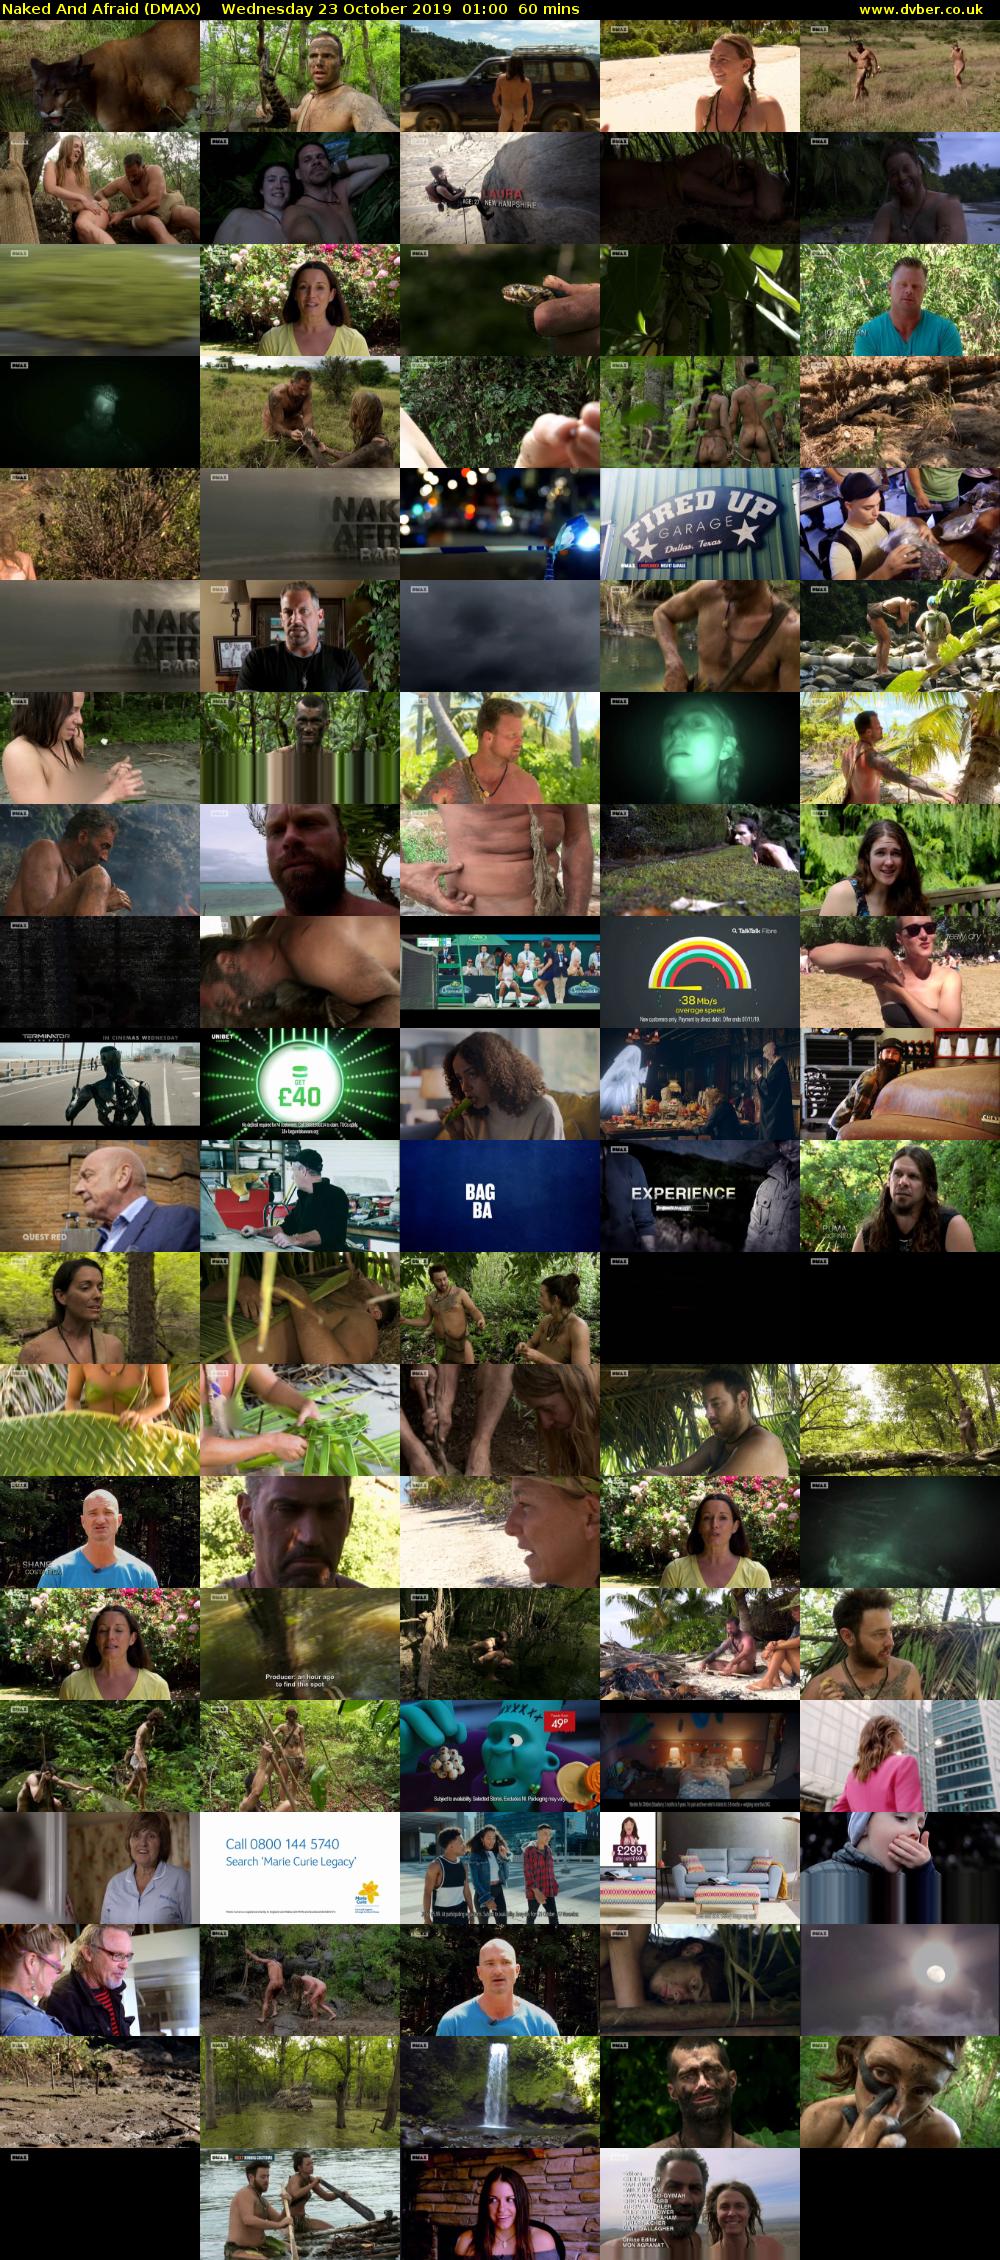 Naked And Afraid (DMAX) Wednesday 23 October 2019 01:00 - 02:00